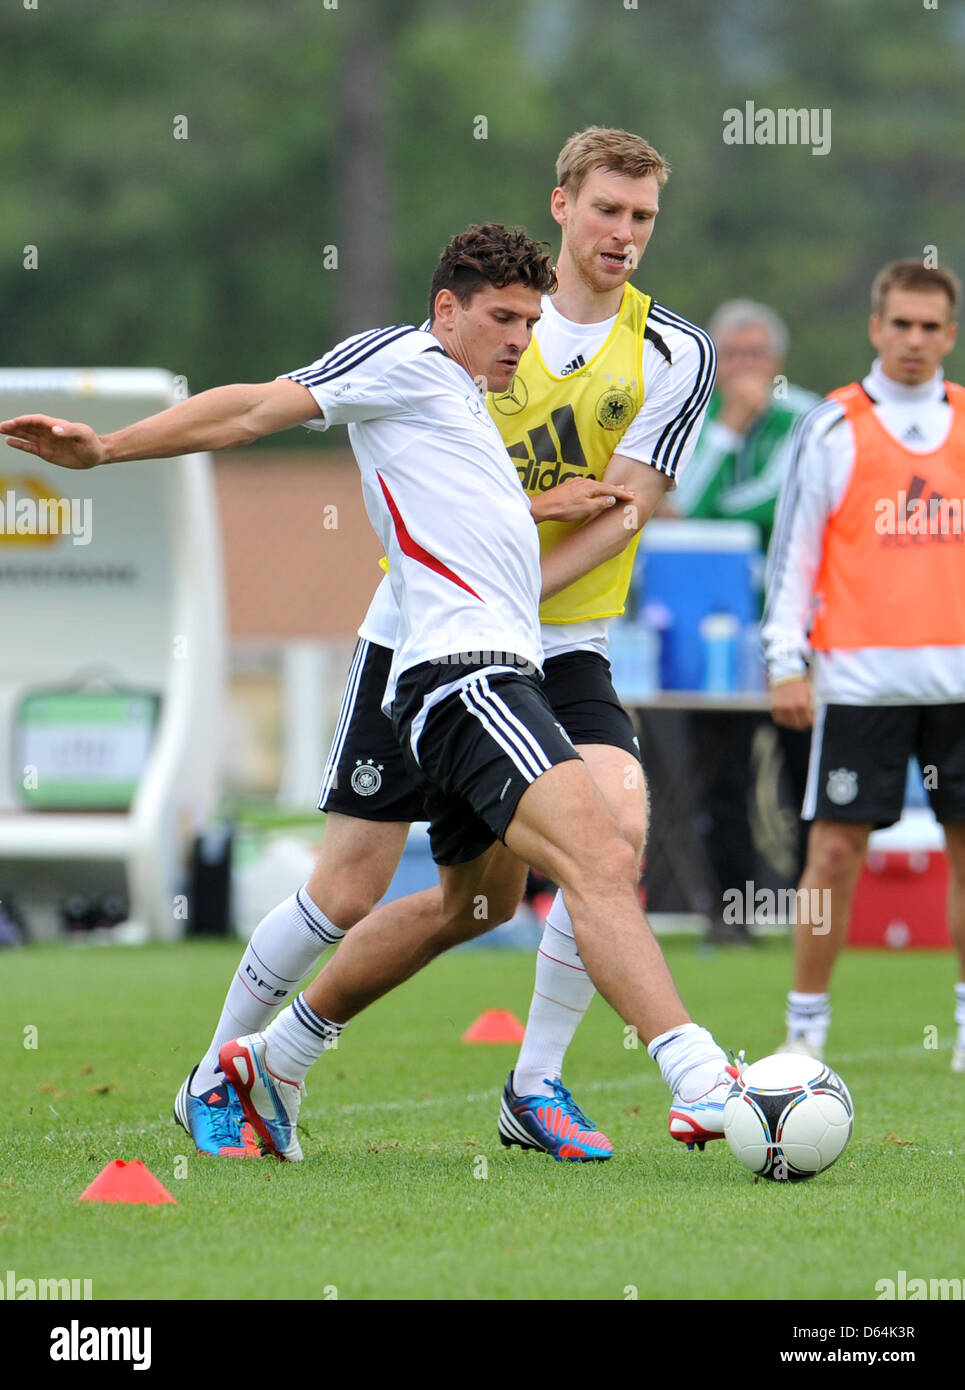 Germany's Per Mertesacker and Mario Gomez (L)  vie for the ball during practice on a pitch in Tourettes, France, 29 May 2012. The German national soccer team is preparing for the Euro 2012 at their training camp in southern France. Photo: ANDREAS GEBERT Stock Photo